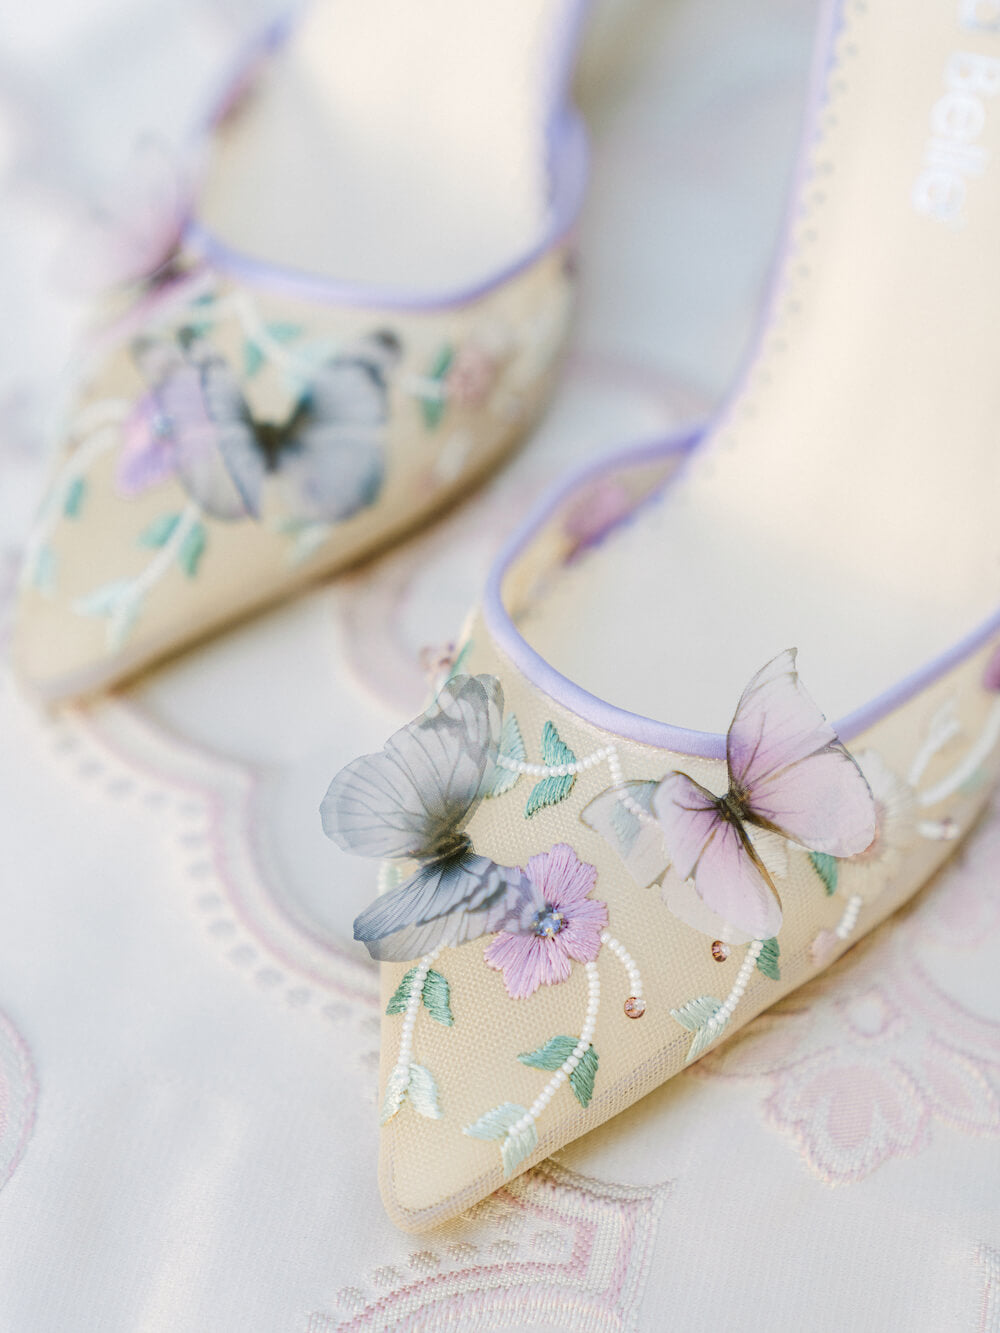 The Prettiest 12-Hour Bridal Shoes Ever